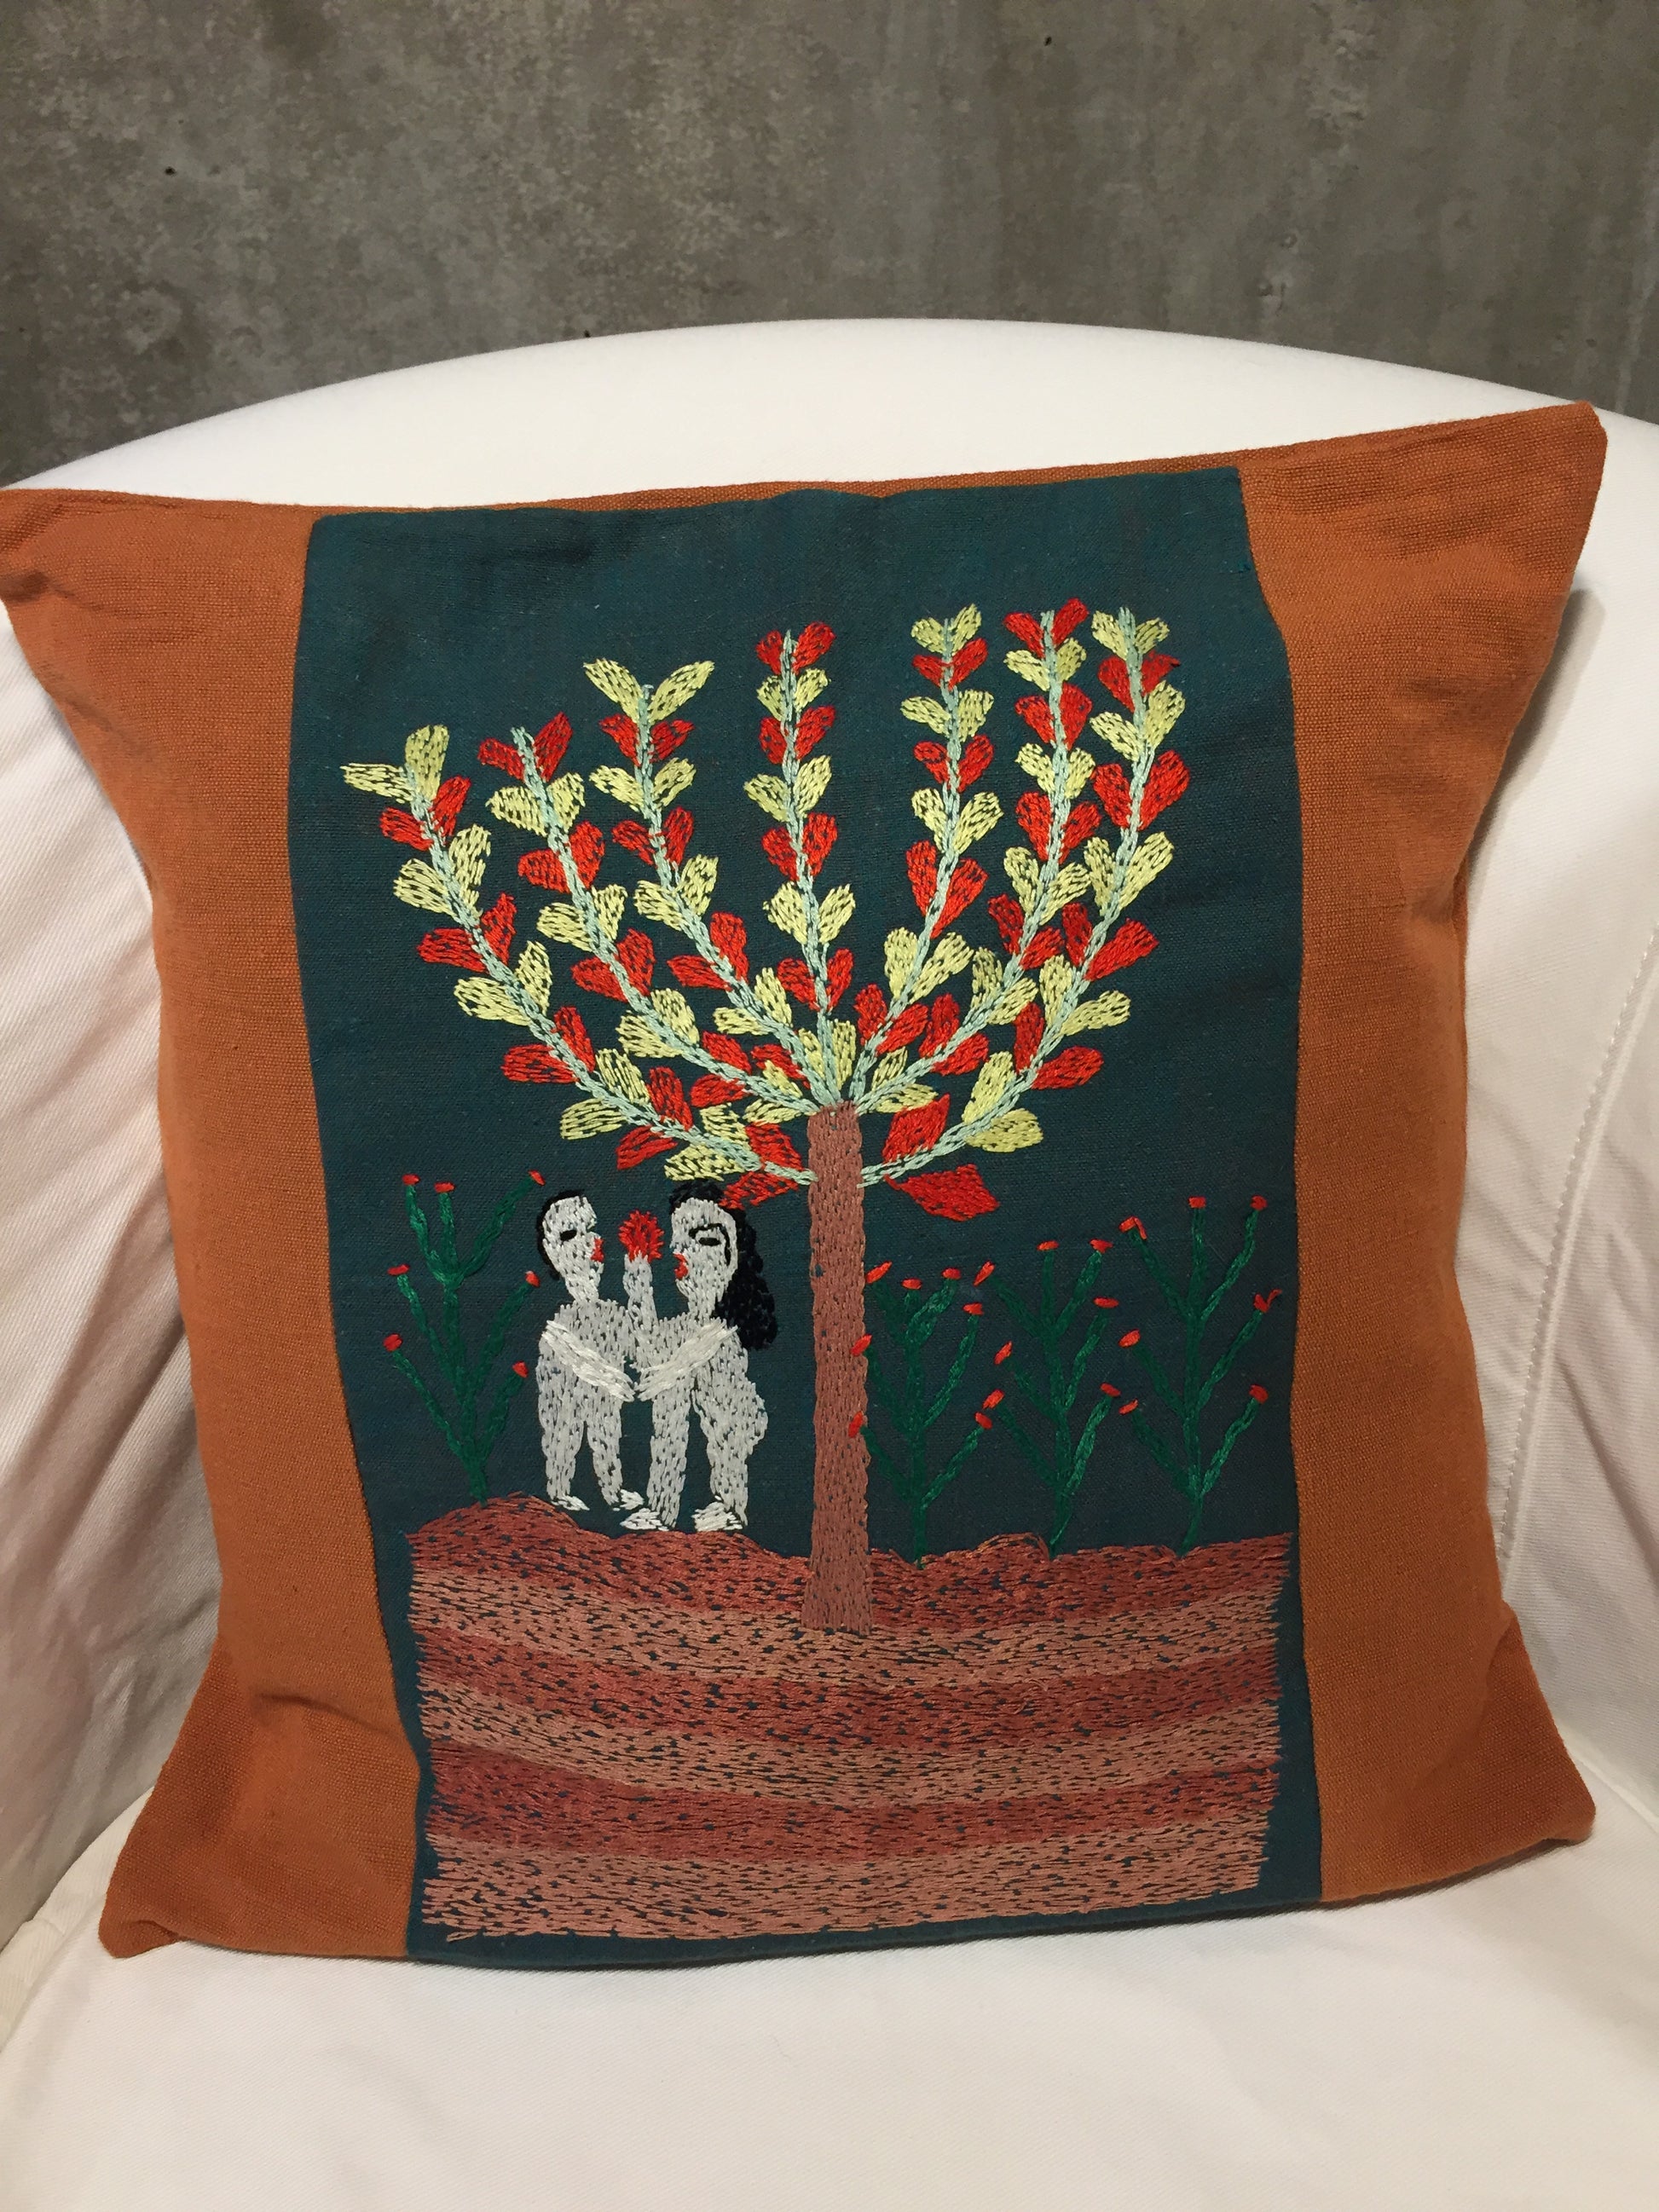 Handwoven Egyptian Cotton Cushion Cover - Hand Embroidered Art - Adam & Eve